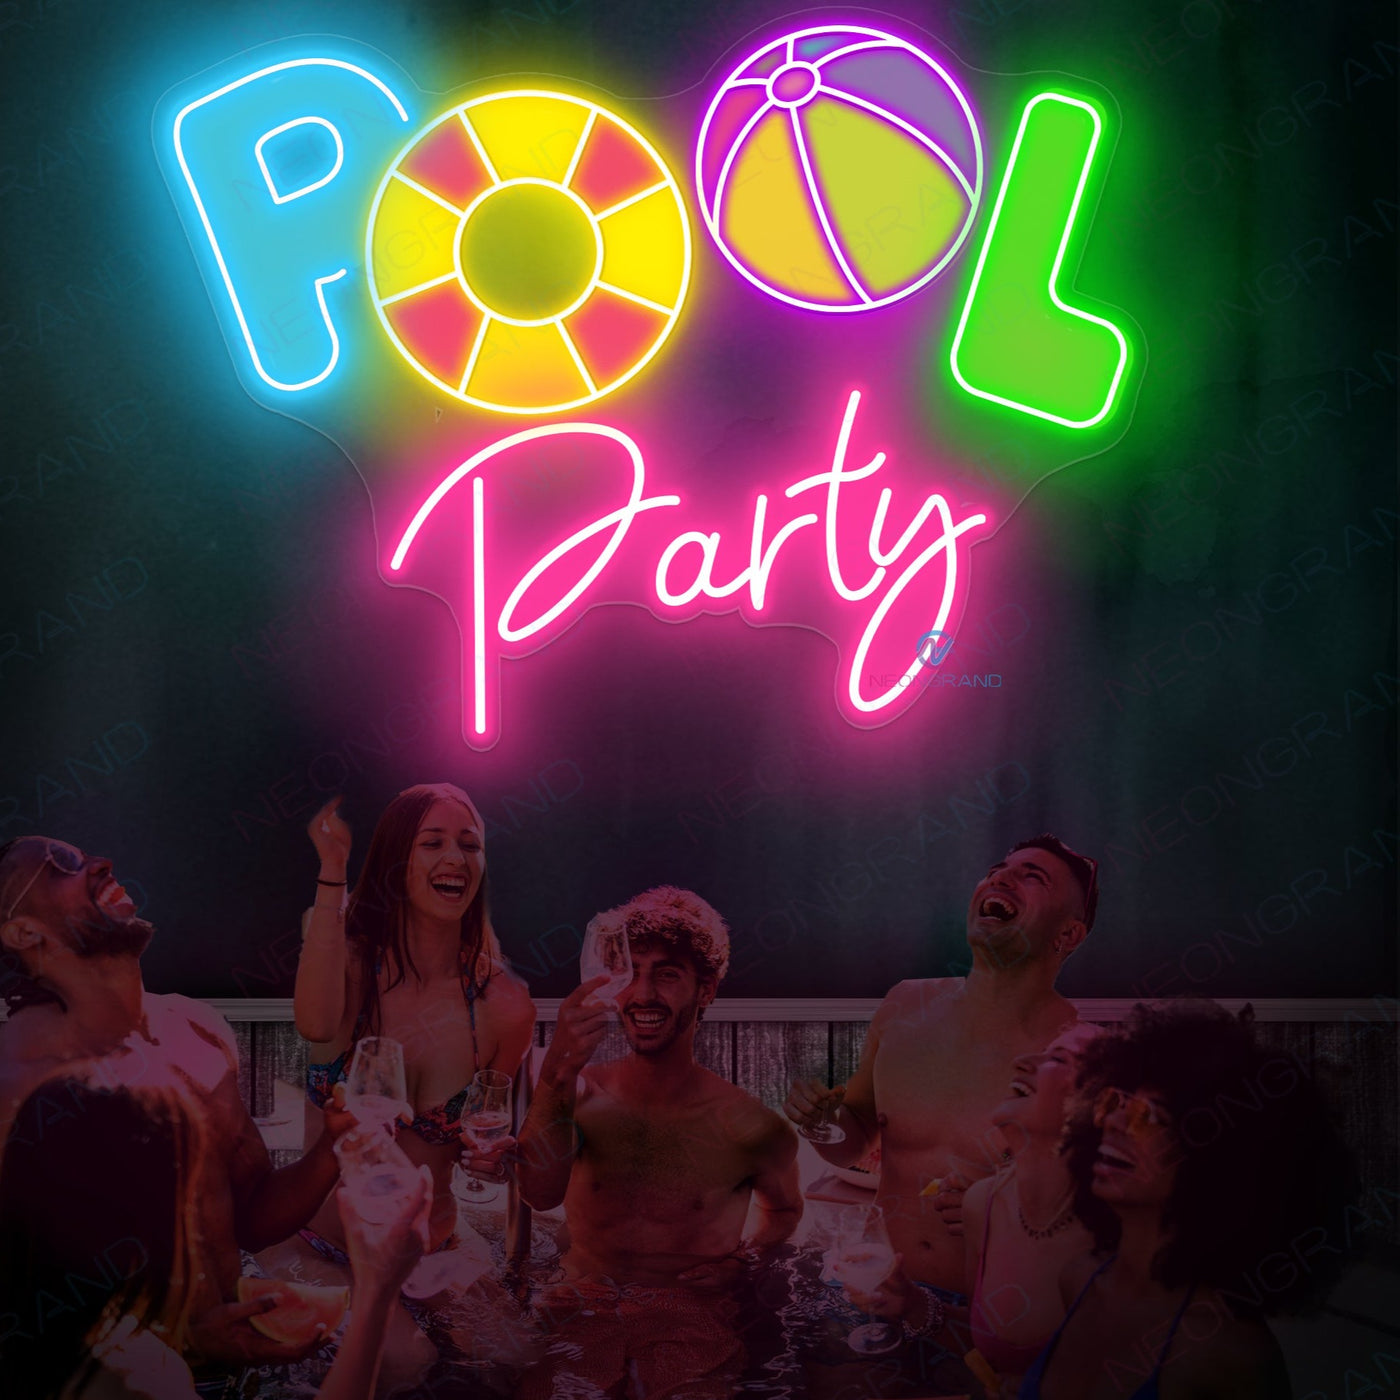 Pool Party Neon Sign Led Light 